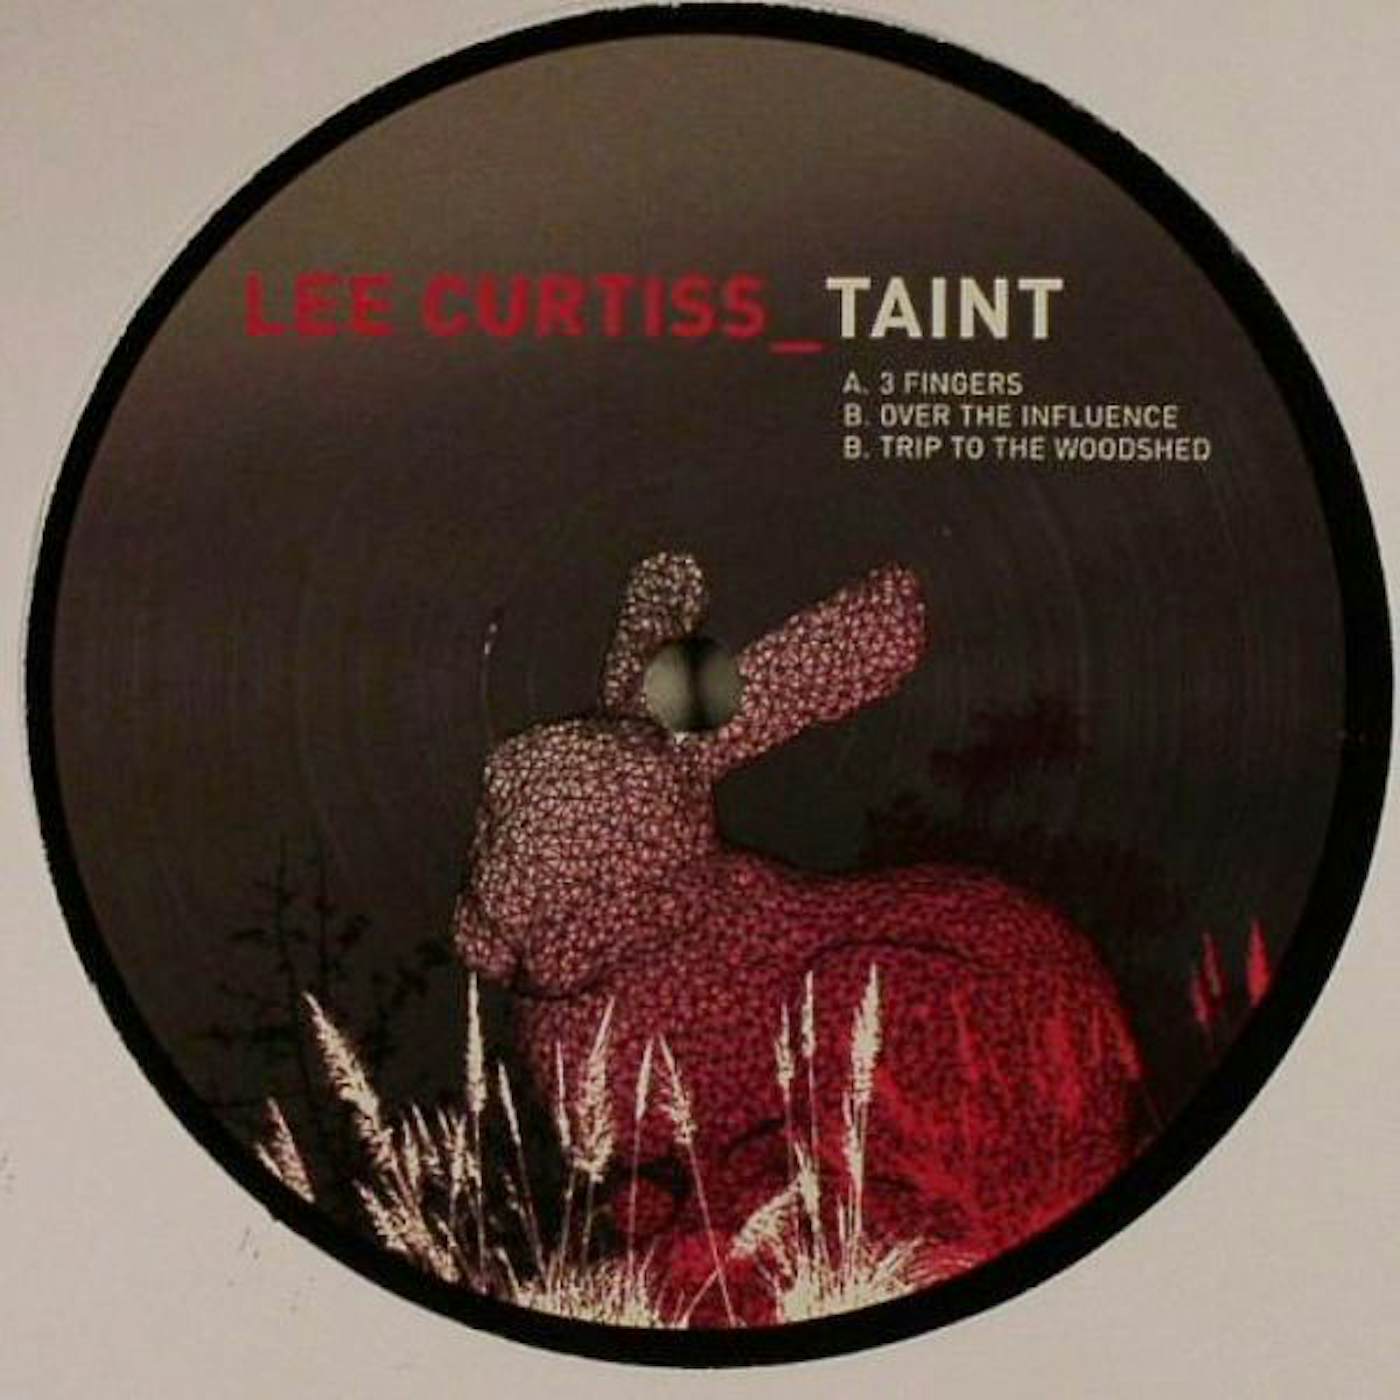 Lee Curtiss TAINT Vinyl Record